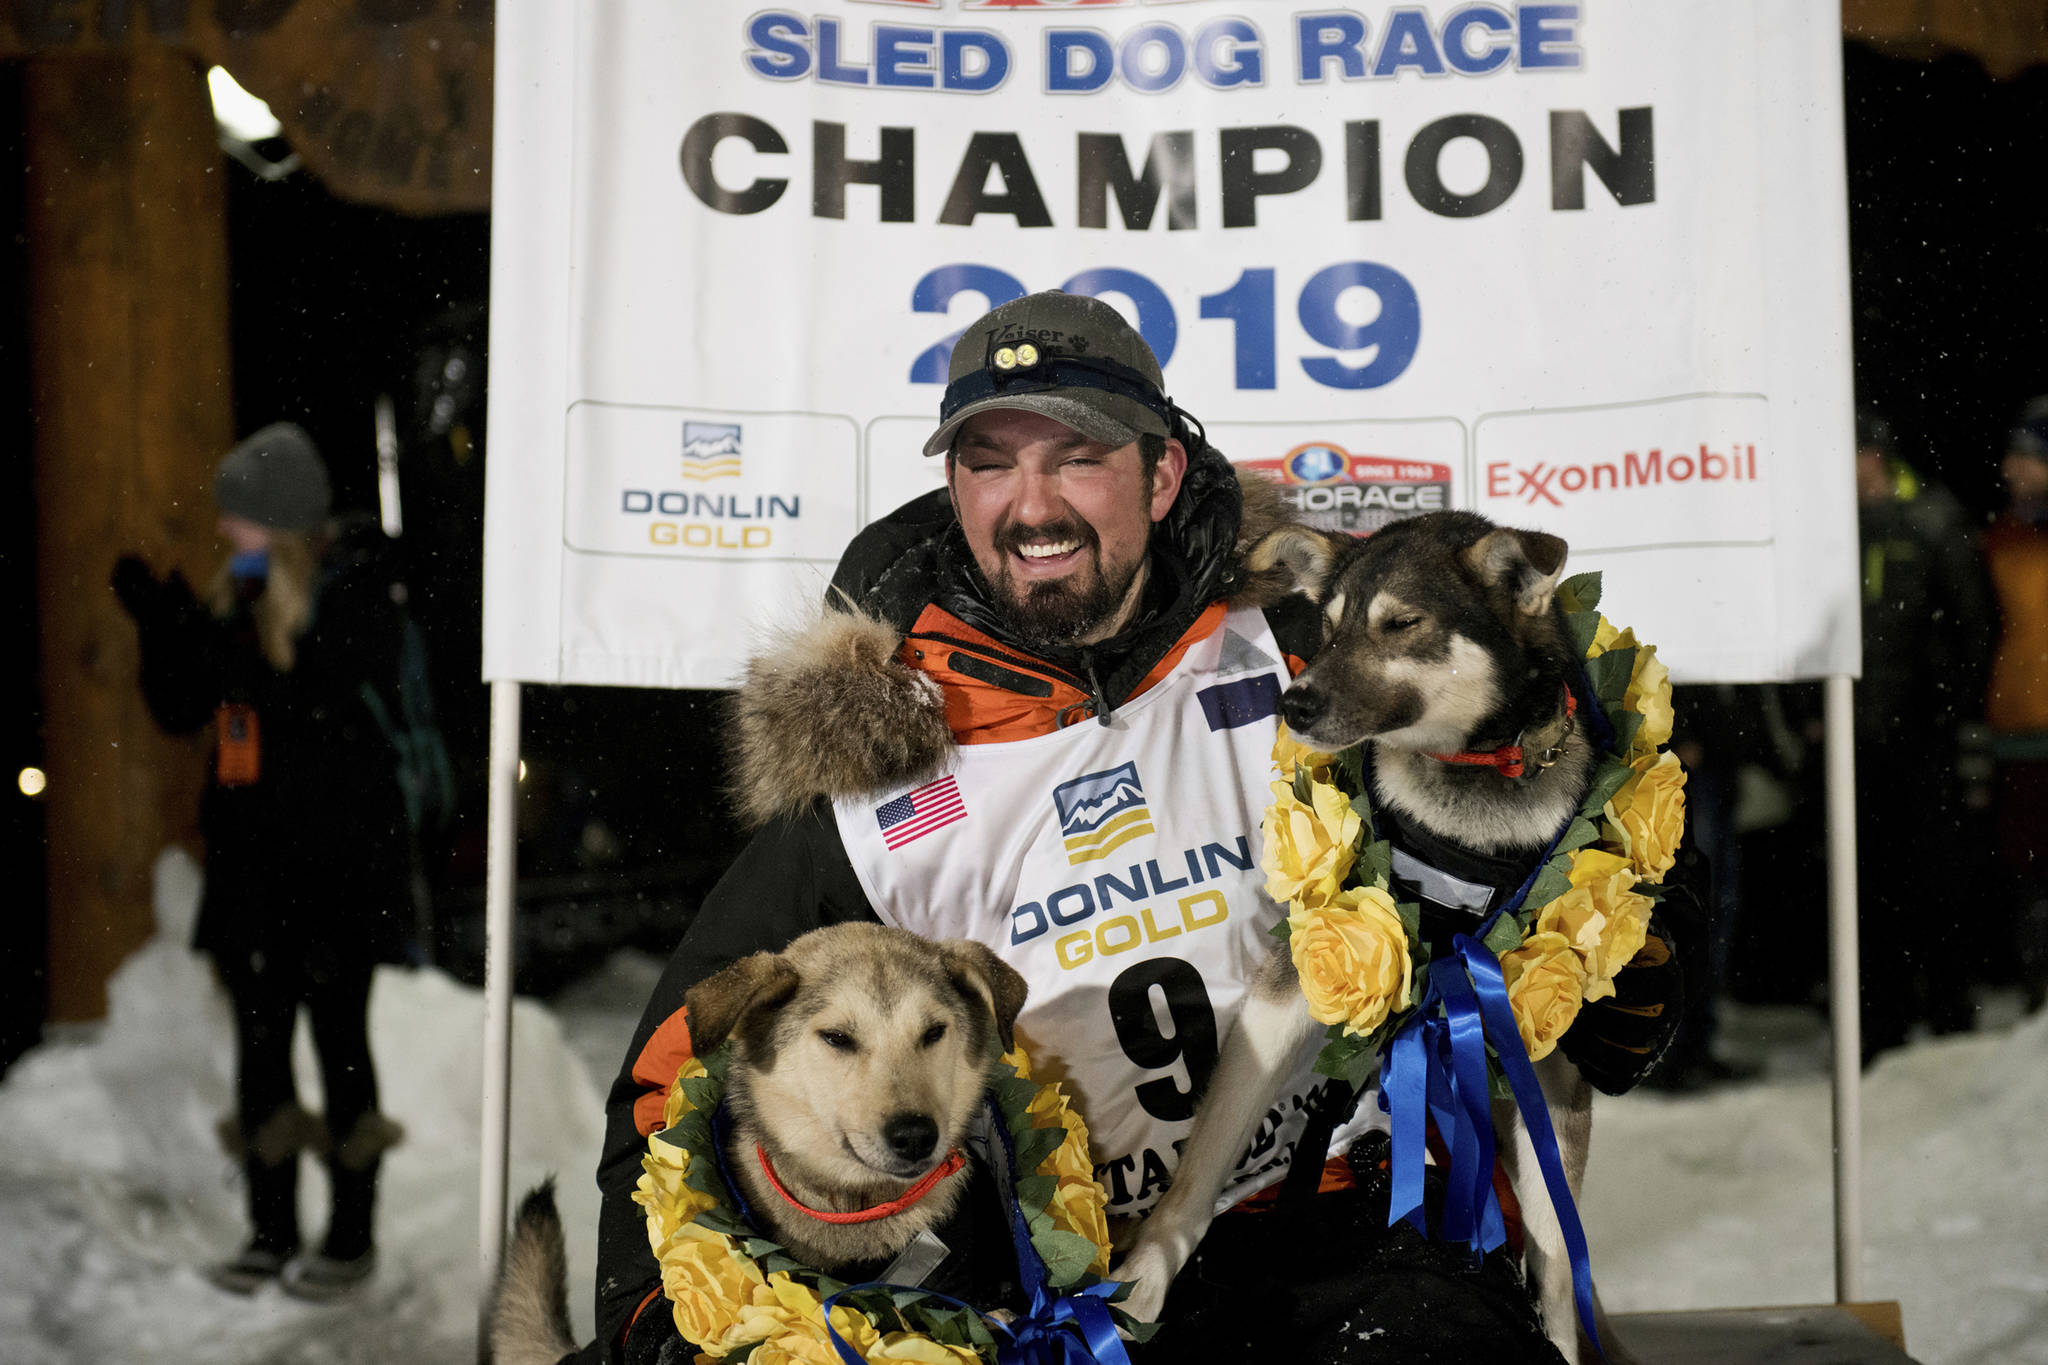 Peter Kaiser poses with his lead dogs, Morrow, left, and Lucy on Wednesday, March 13, 2019, in Nome, Alaska, after winning the Iditarod Trail Sled Dog Race. It’s the first Iditarod victory for Kaiser in his 10th attempt. (Marc Lester | Anchorage Daily News)